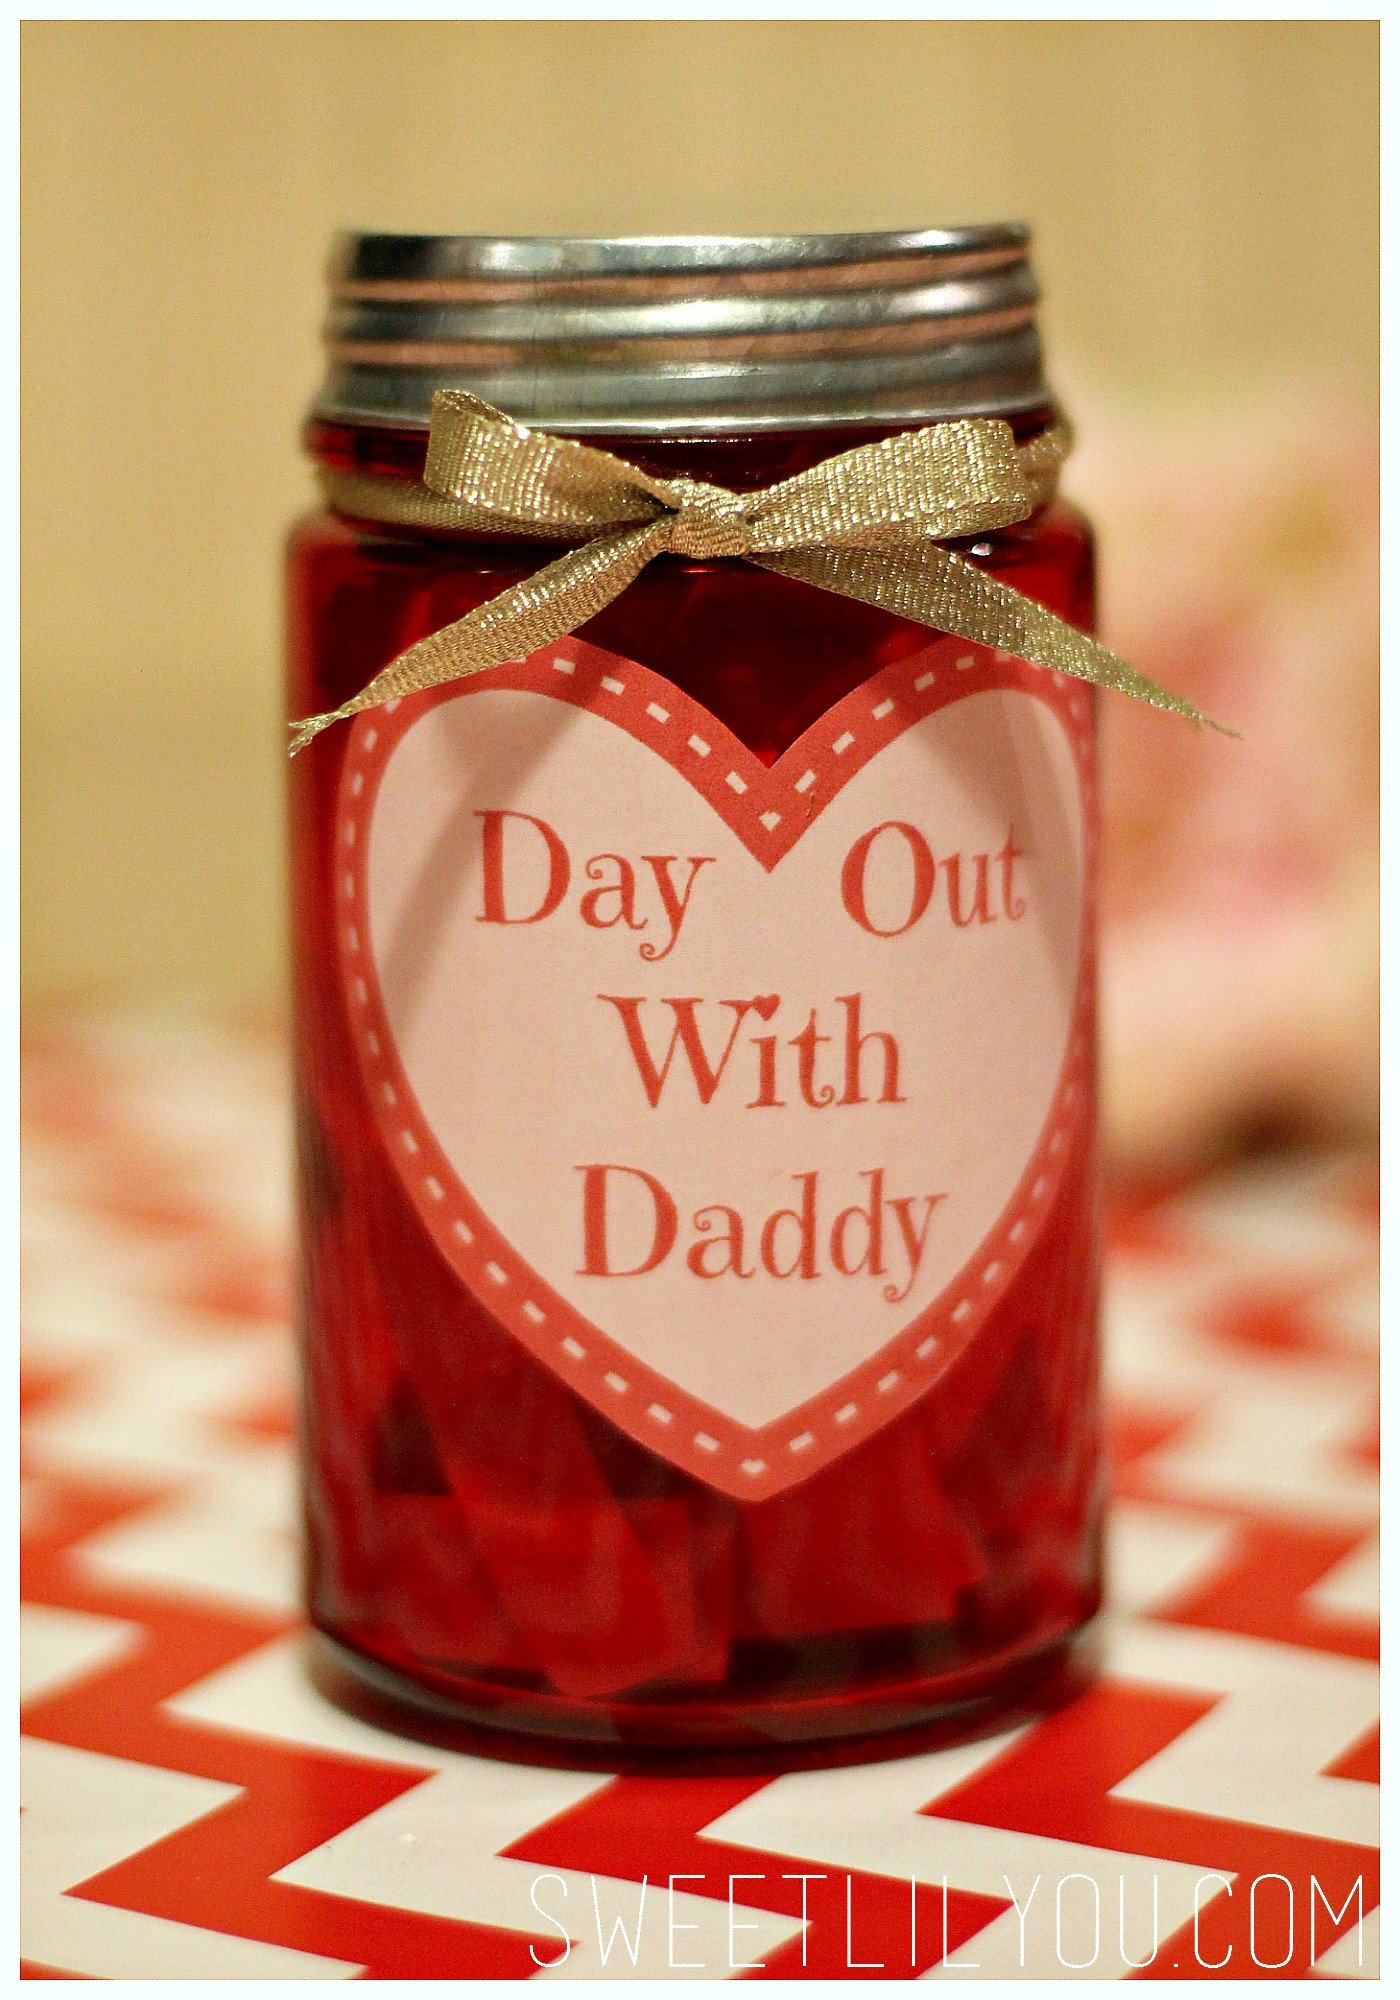 Valentines Gift Ideas For Dad
 Day Out With Daddy Jar Valentine s Day Gift for Dad